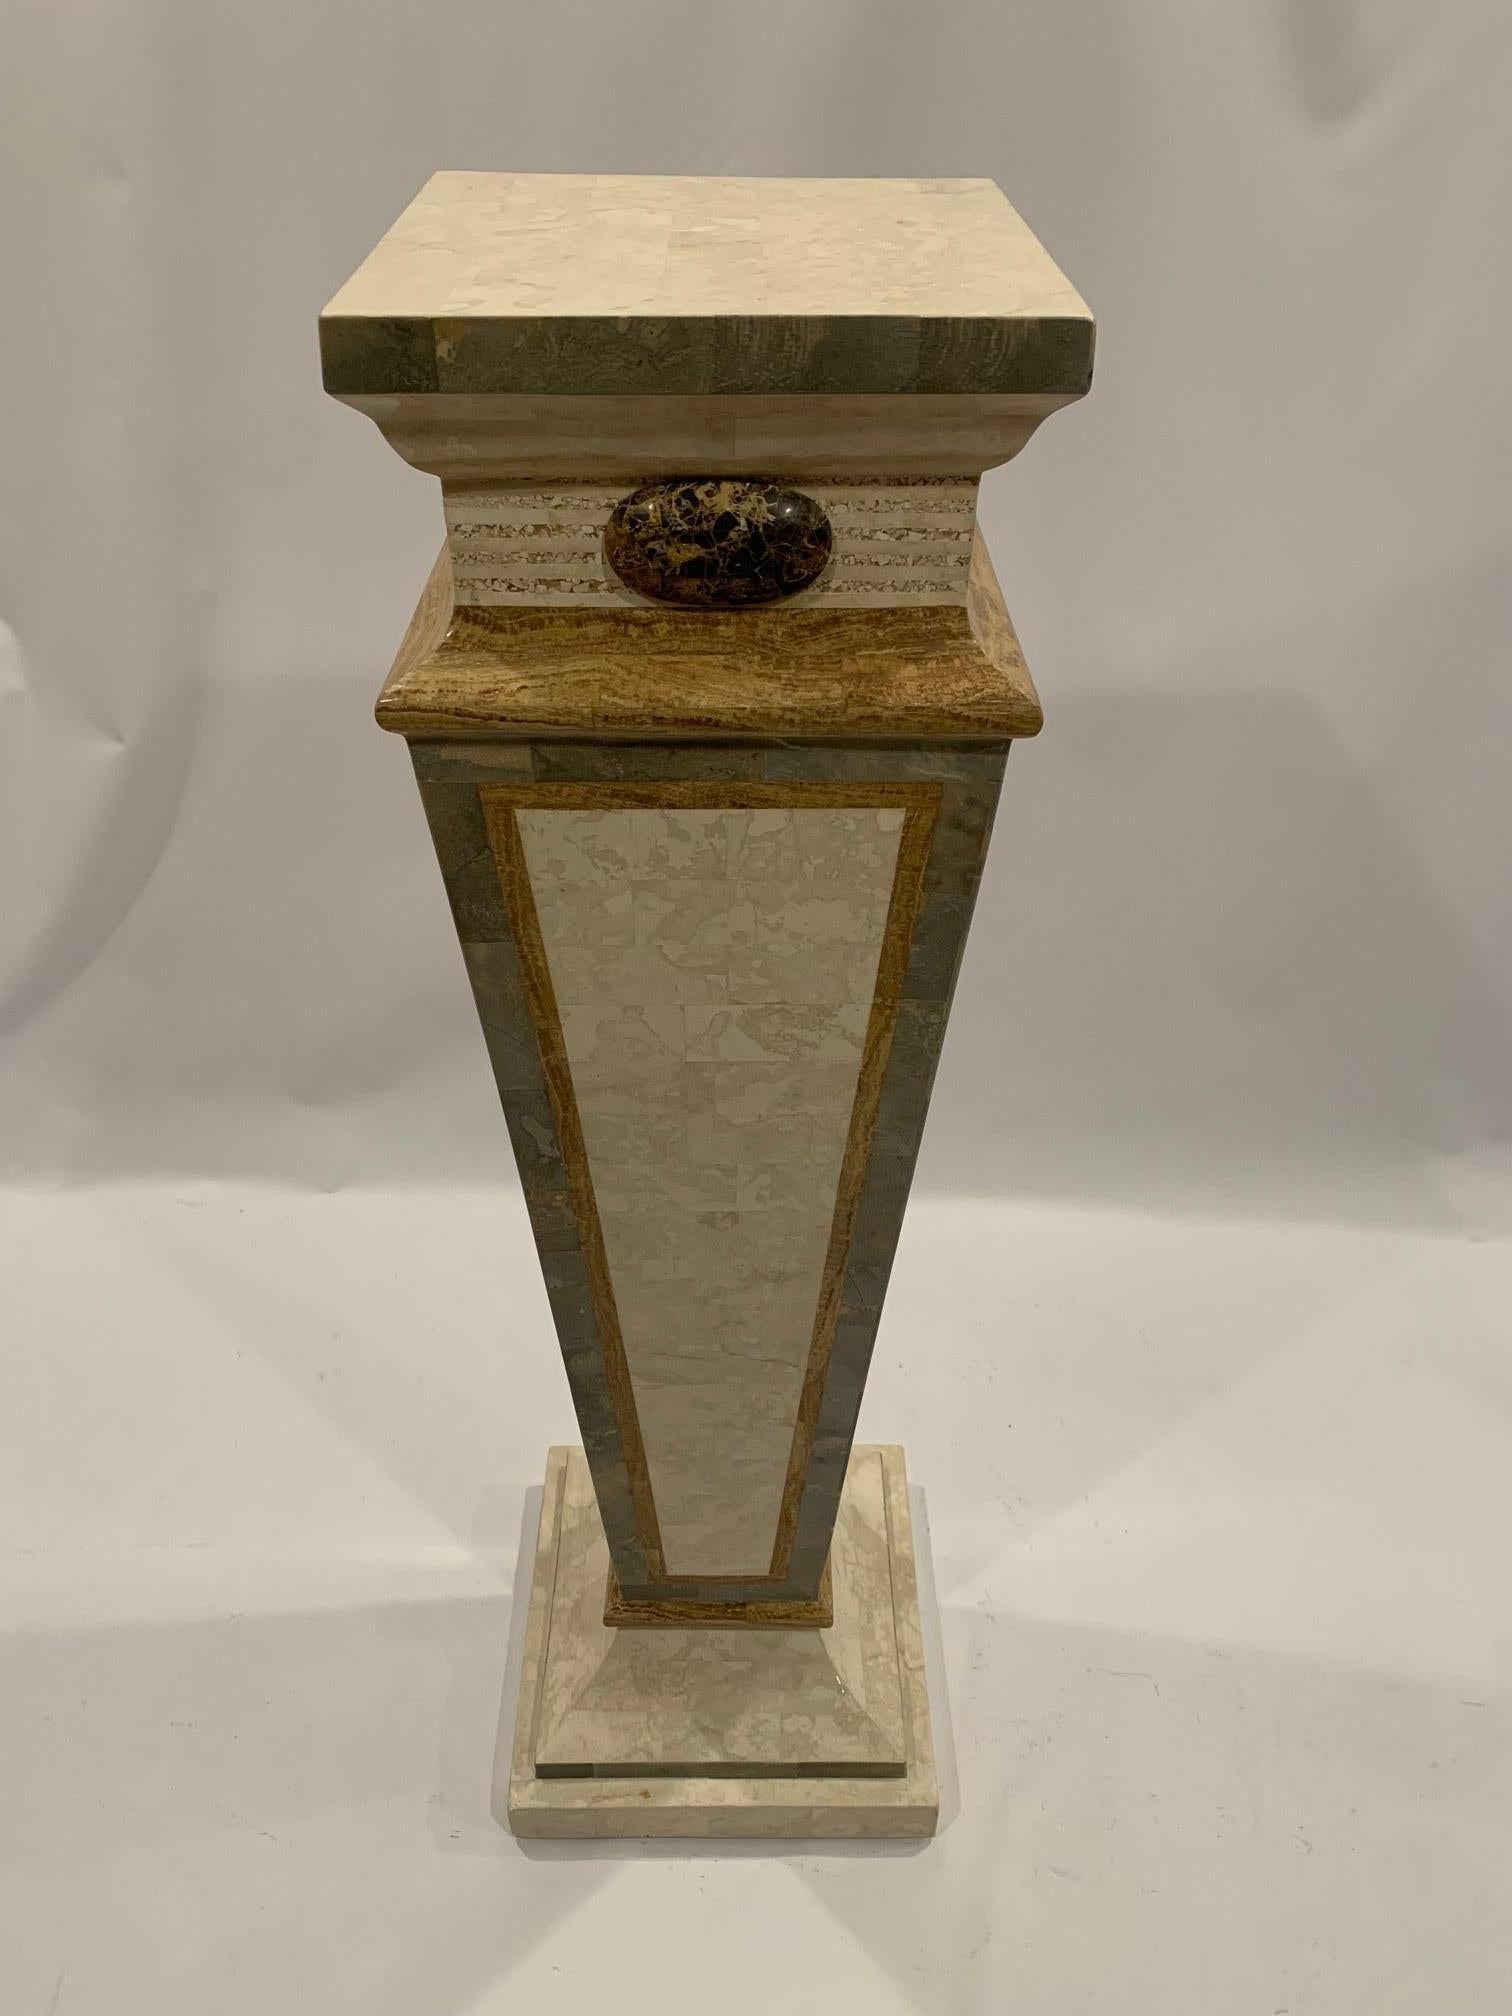 Elegant tessellated stone pedestal in lovely neutral color palette. 
Base is 13